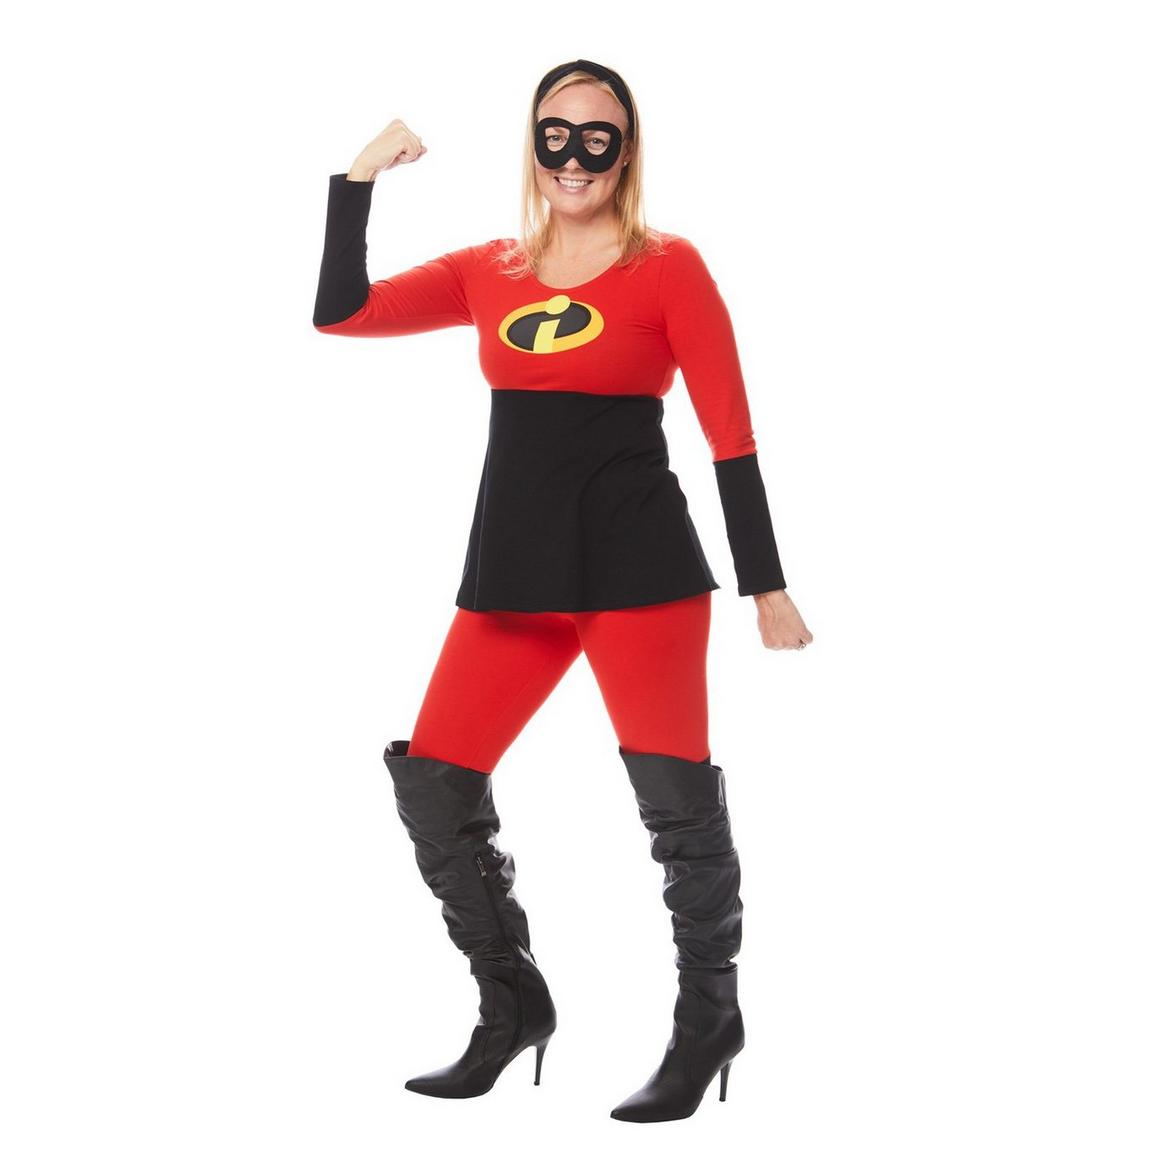 Disney The Incredibles Mrs.Incredible Plus Size Adult Costume, Size: One Size, Rubie's Costume Company